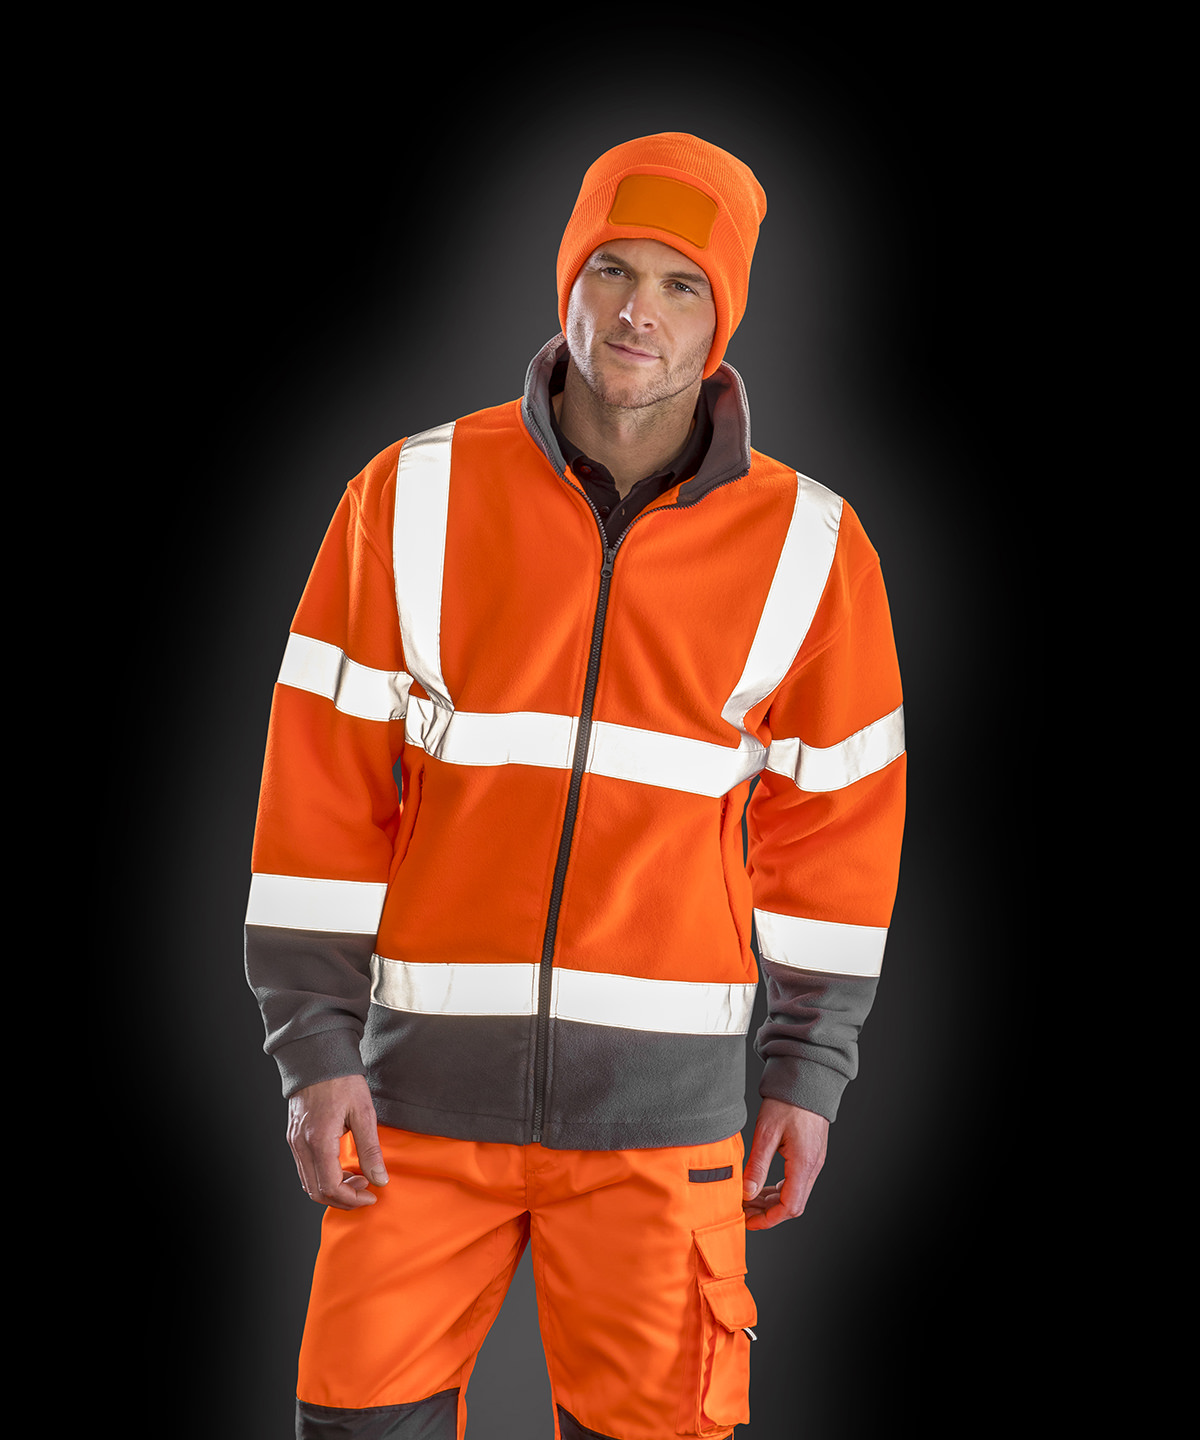 Safety microfleece